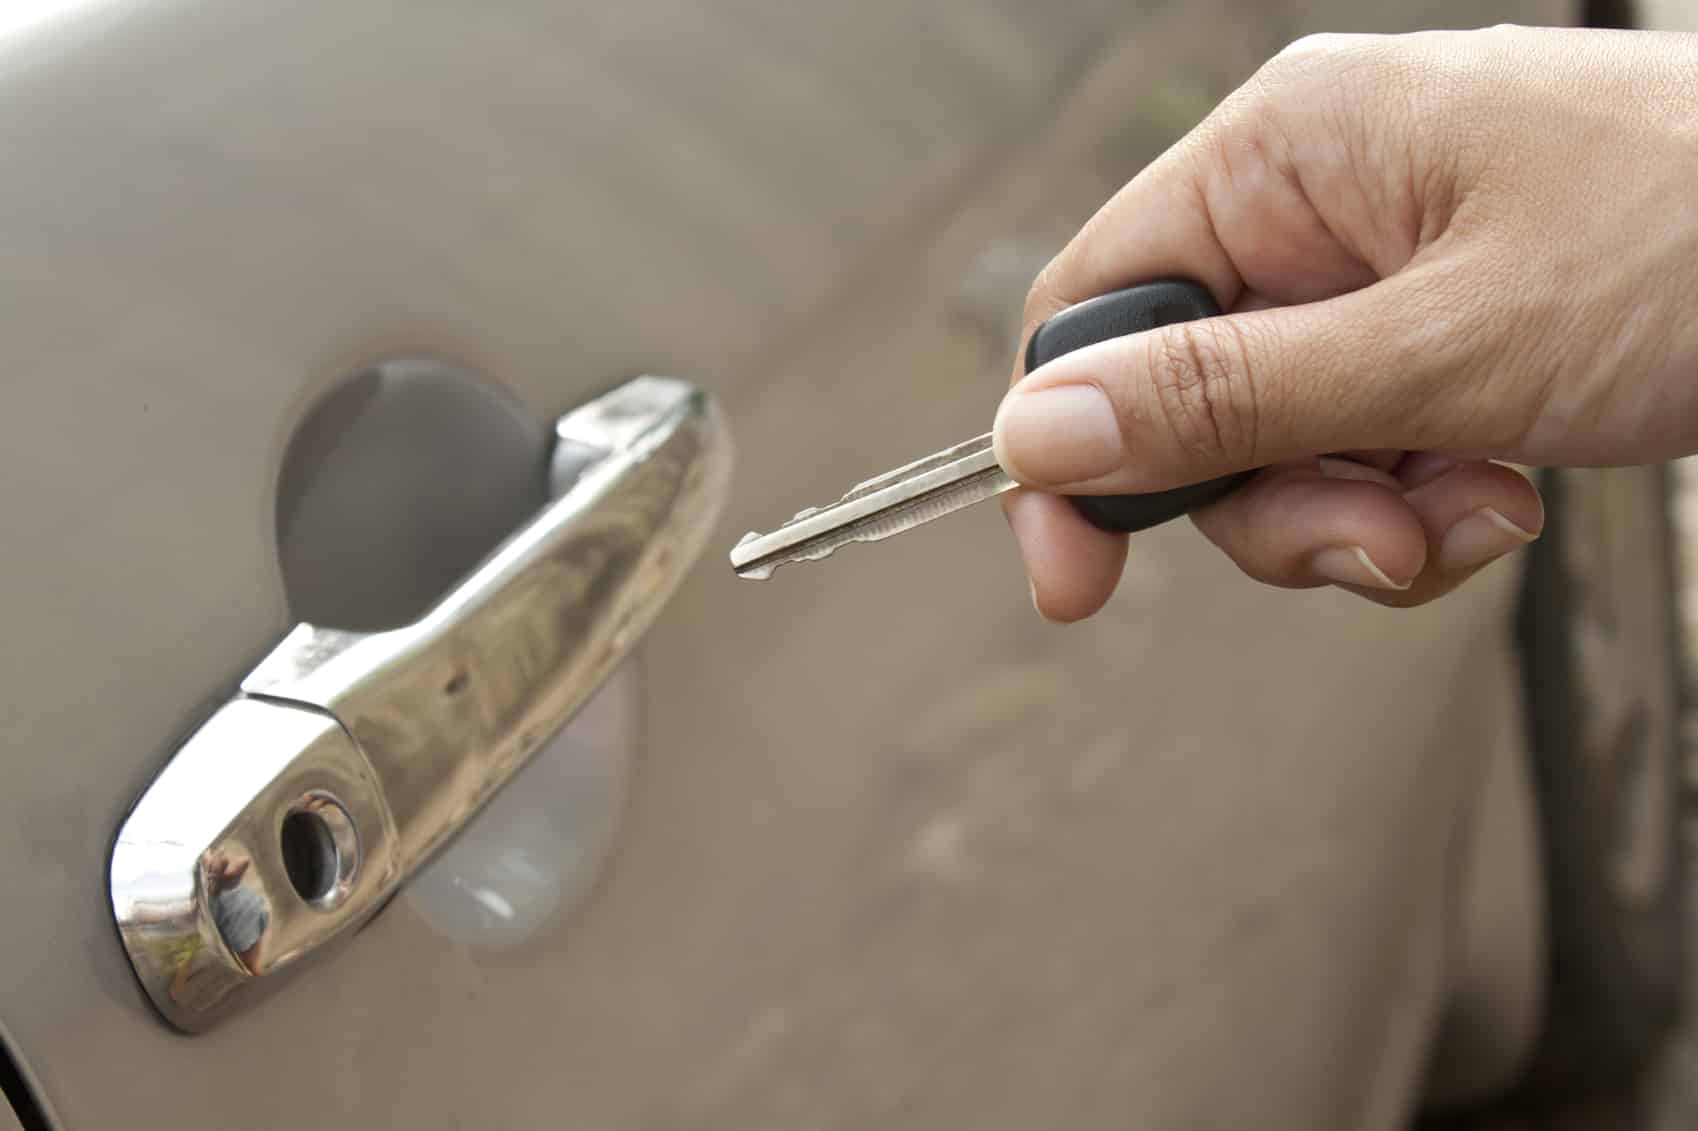 Hand inserting the car's key